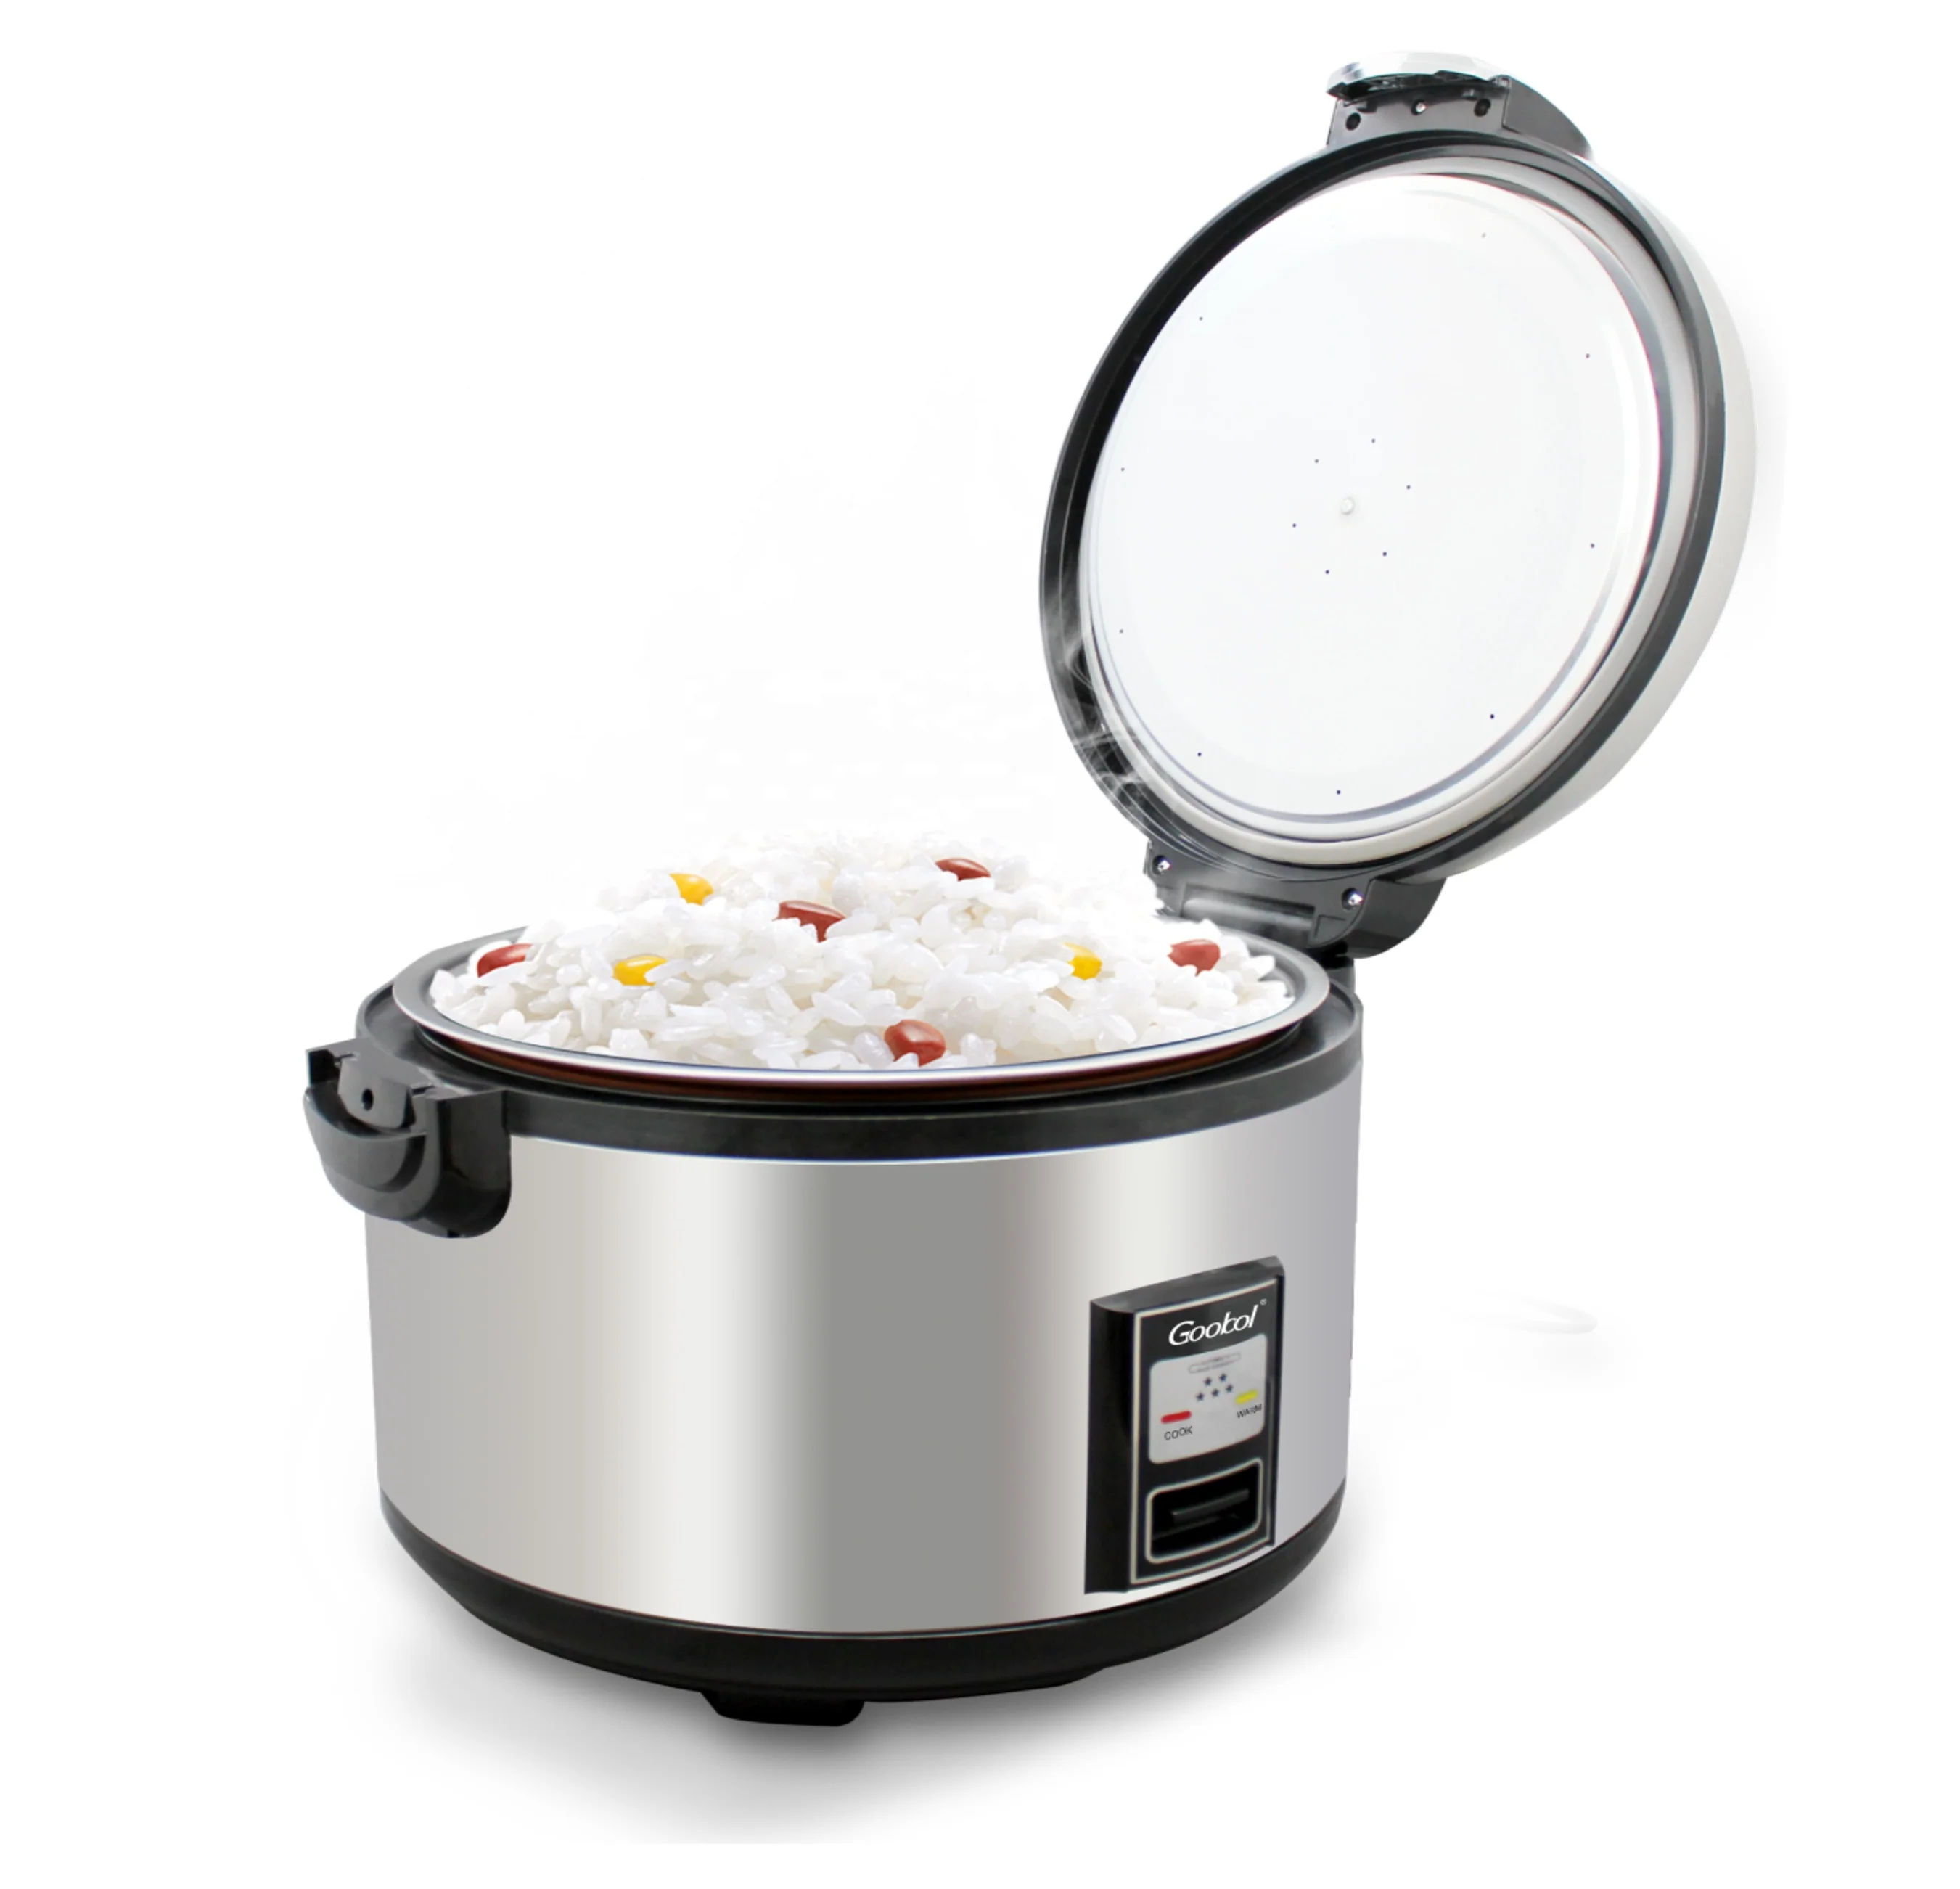 10 Liter Deluxe Commercial Rice Cooker - Buy Commercial Rice Cooker,Big ...